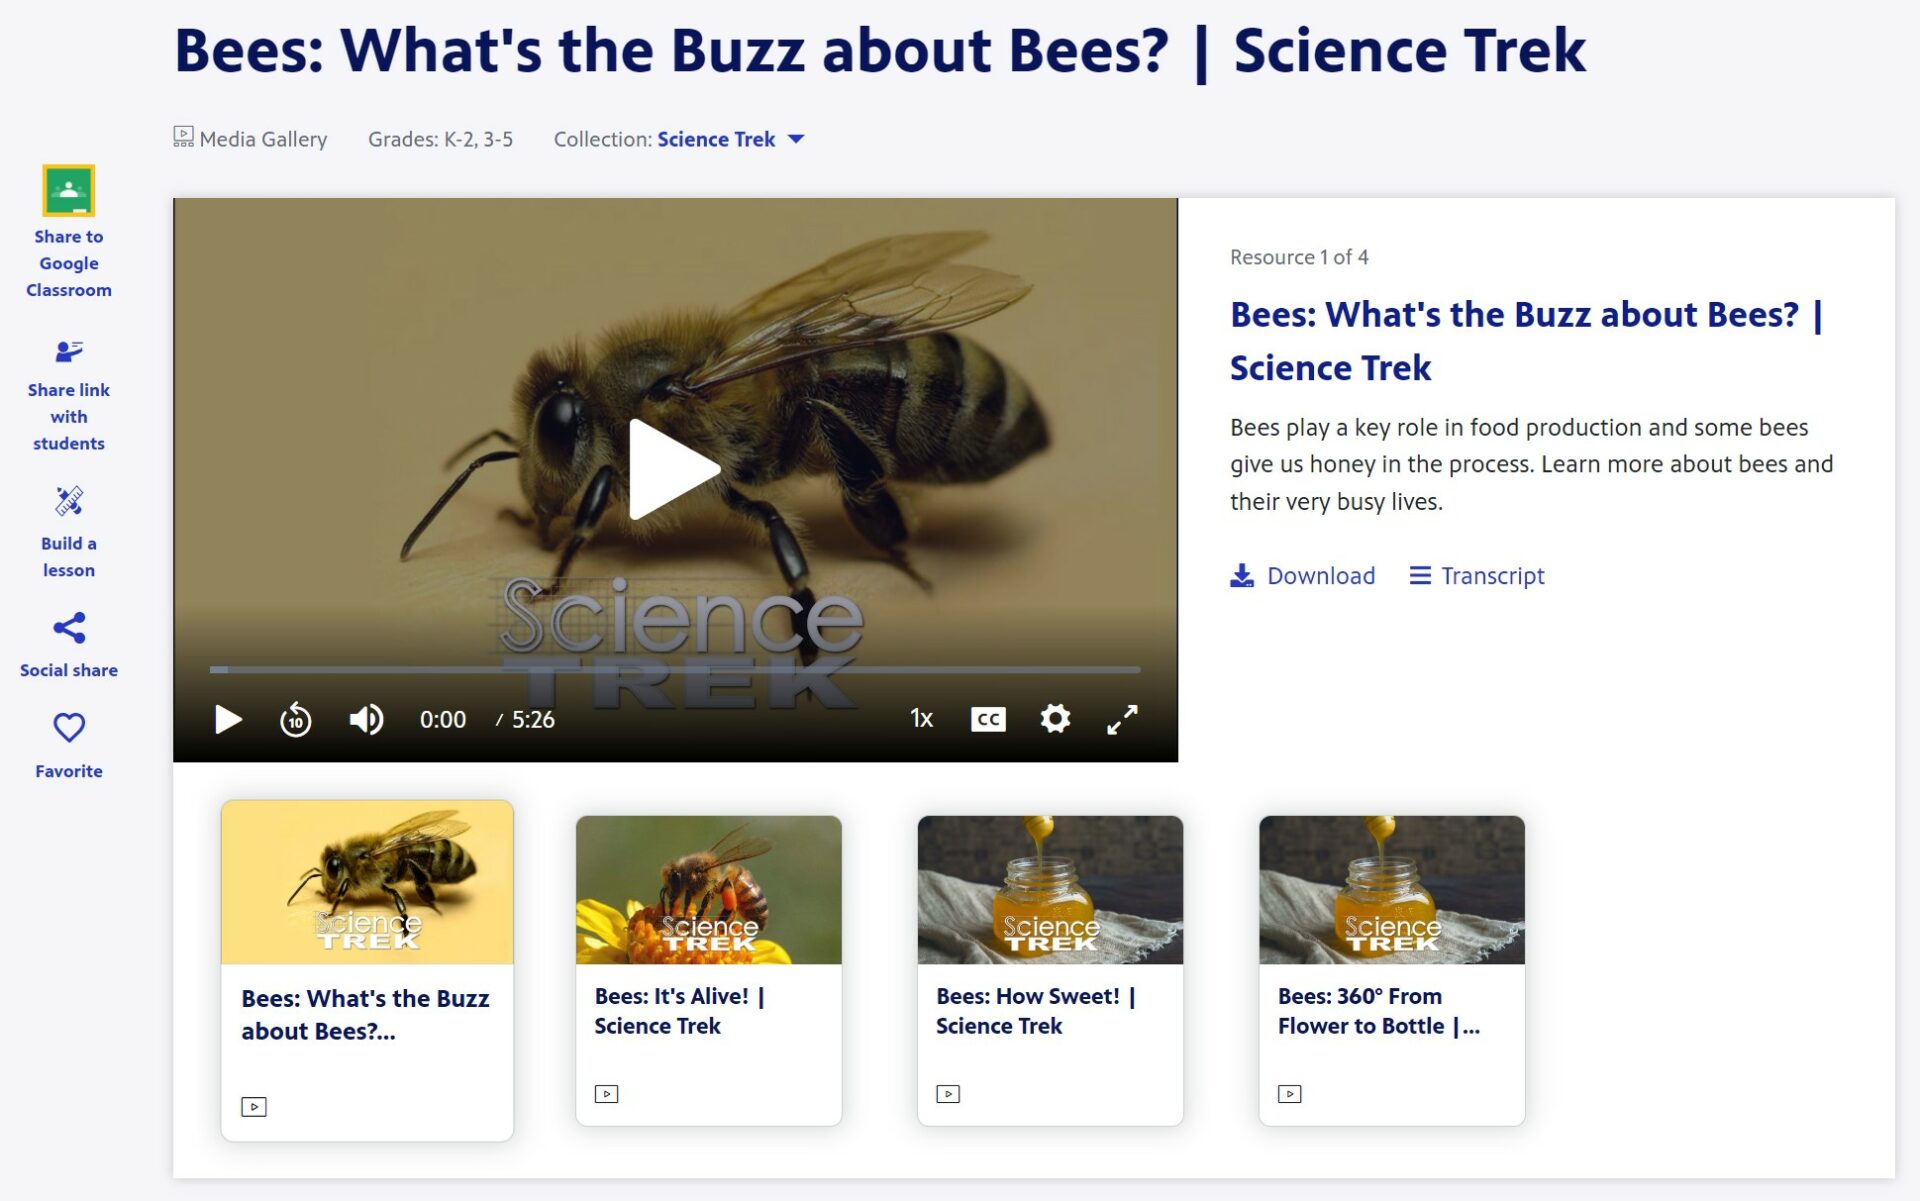 Bees: What's the Buzz about Bees? | Science Trek